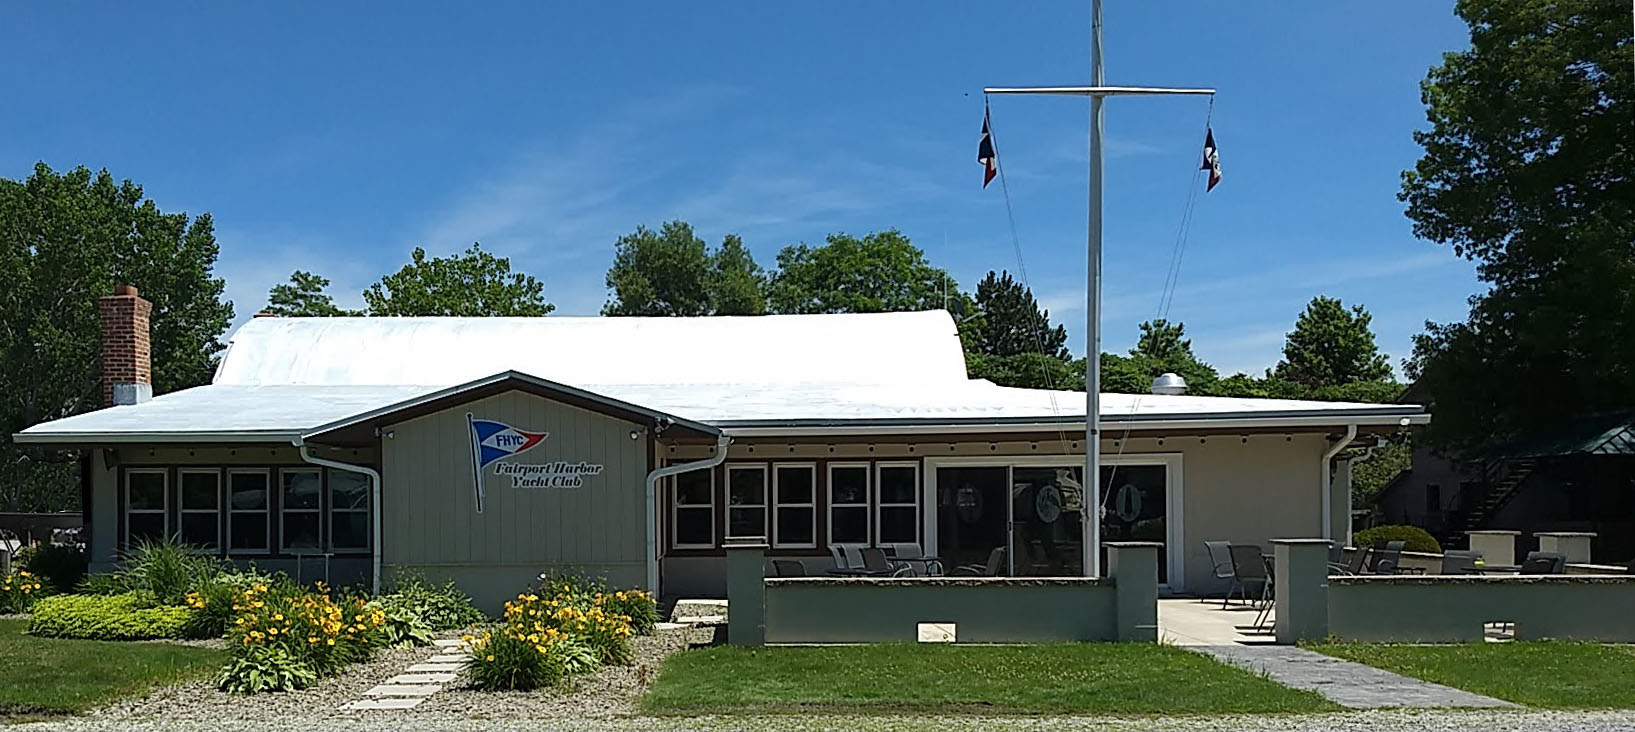 the reserve harbor yacht club